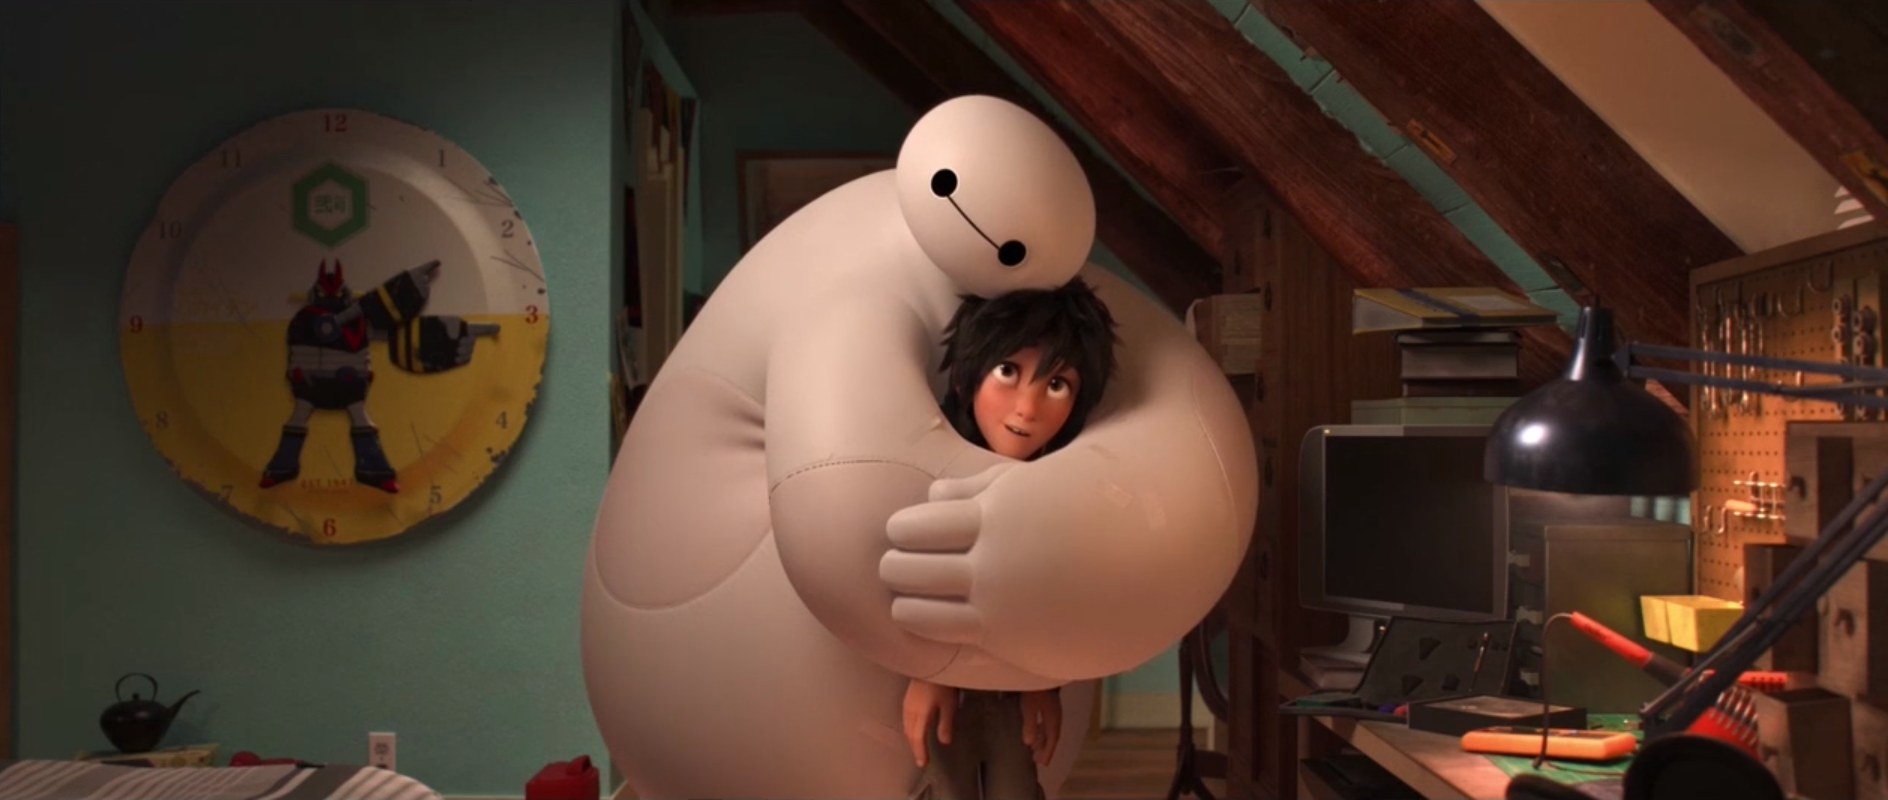 A frame from a movie Pointedfox worked on, Big Hero 6